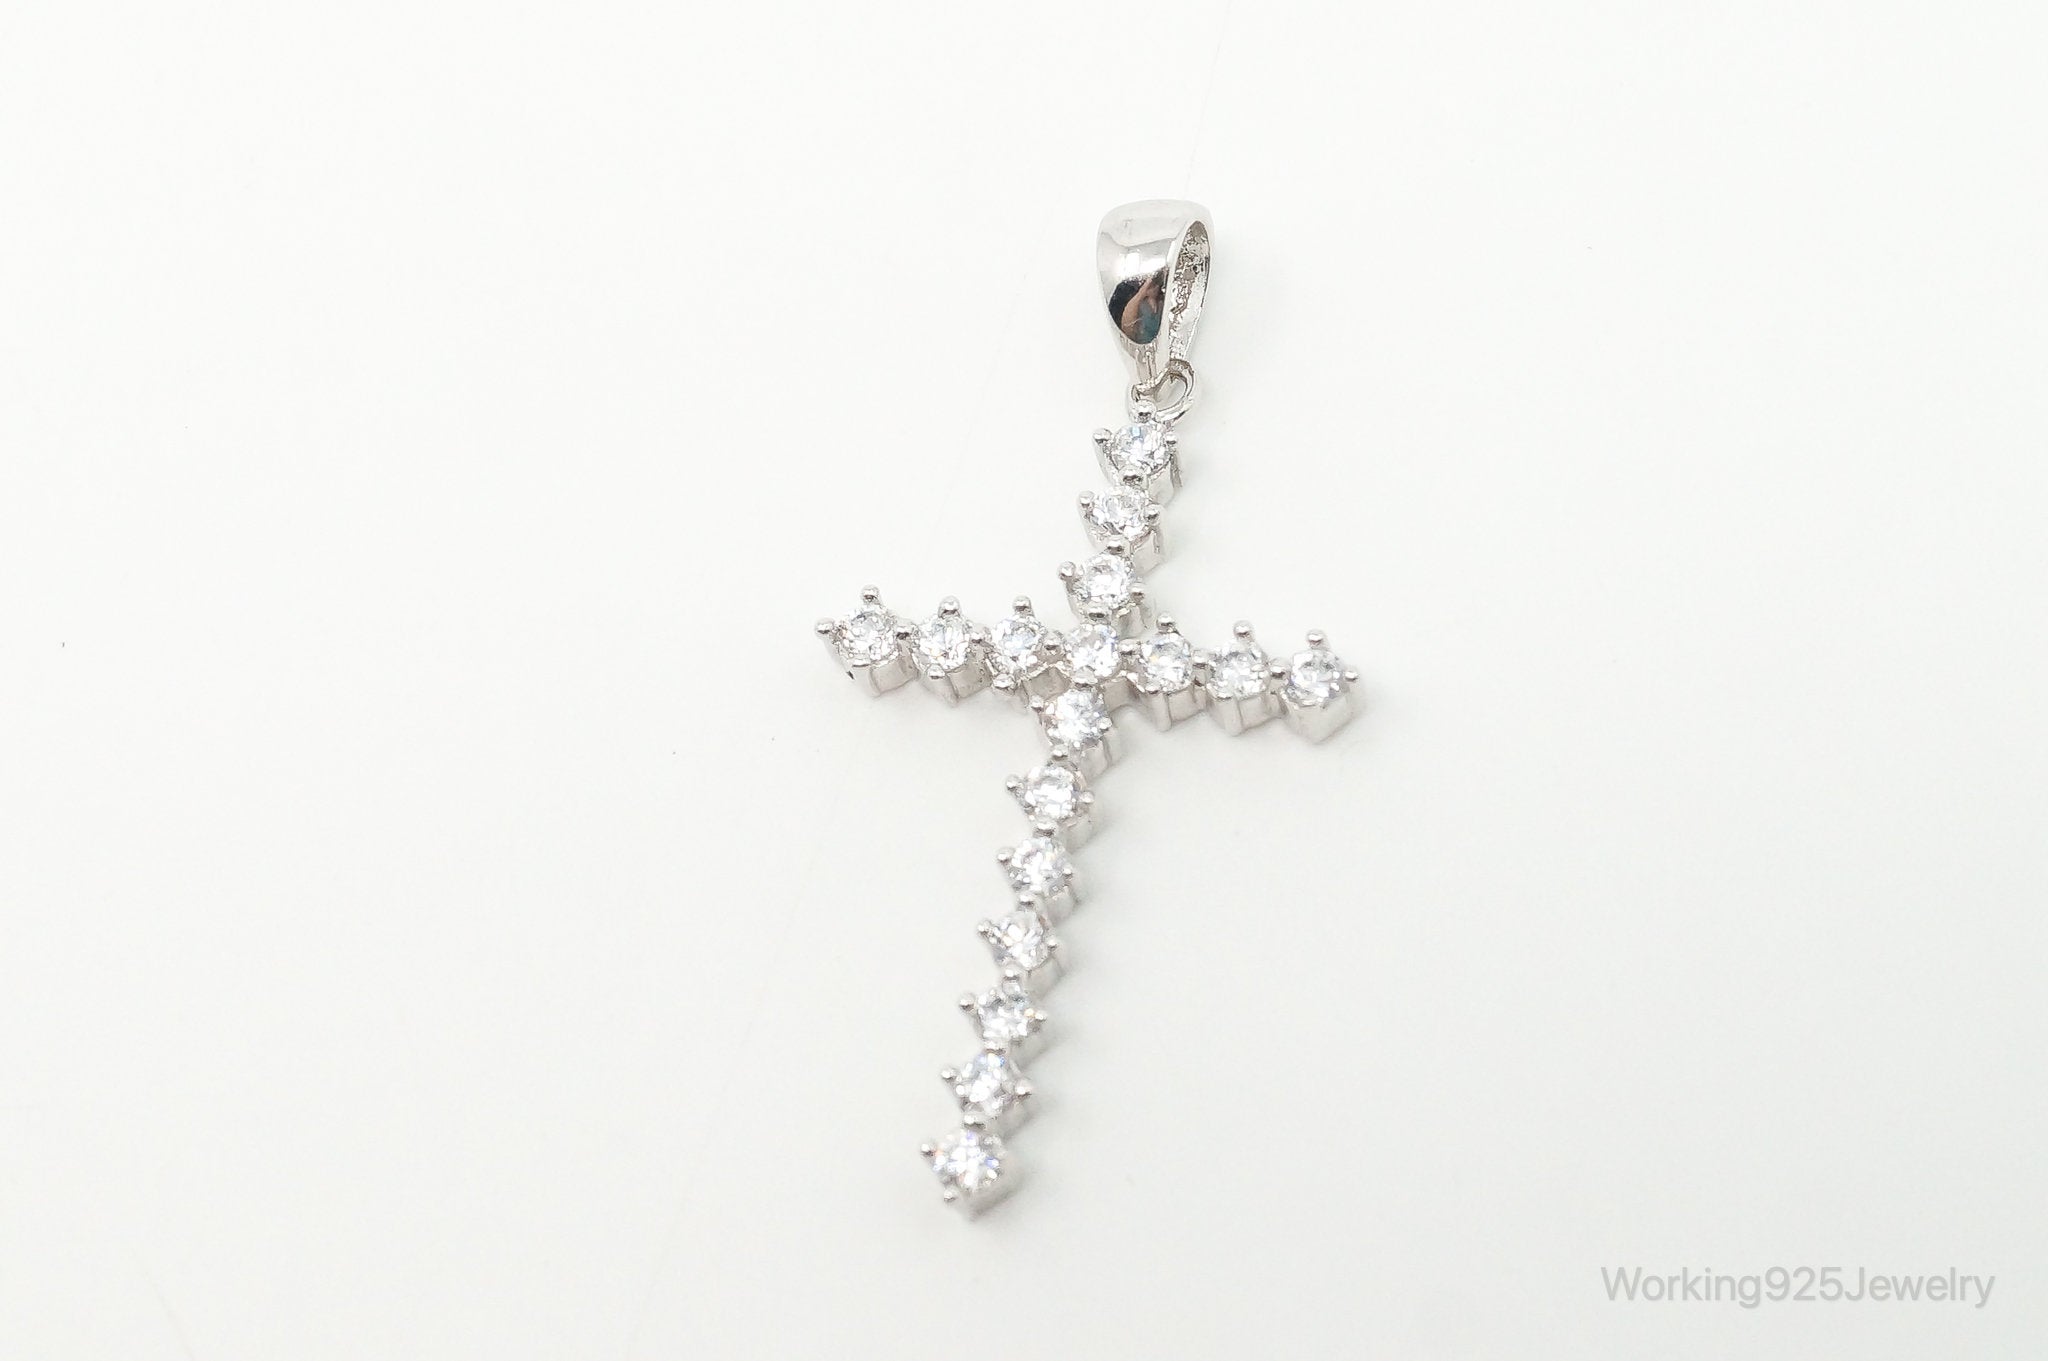 Large Vintage Cubic Zirconia Cross Sterling Silver Necklace Pendant